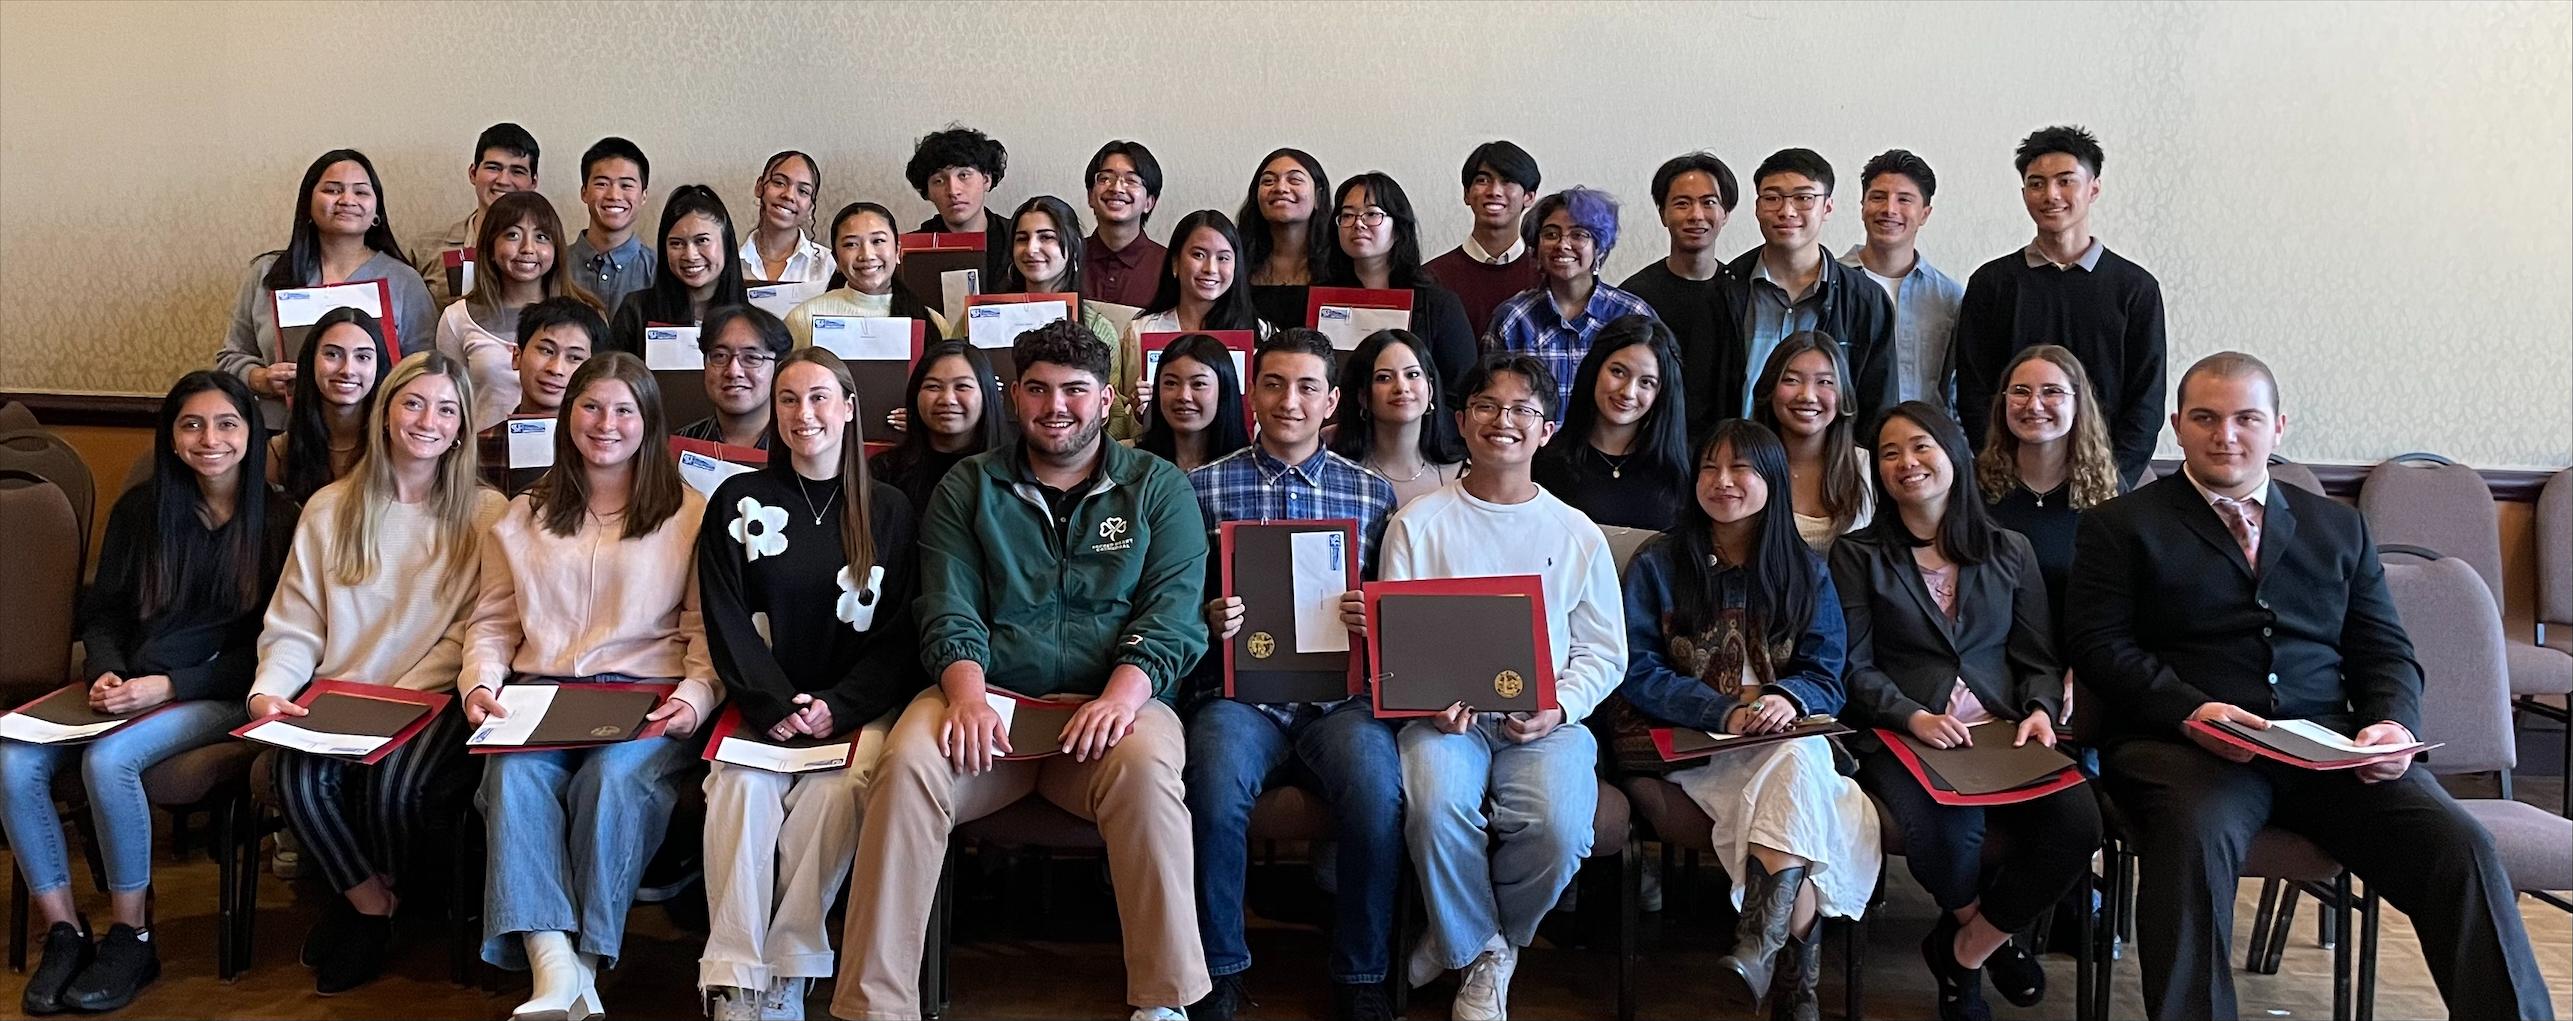 Students from South San Francisco Unified School District (SSFUSD) took home 33 out of 39 scholarship awards at the South San Francisco Chamber of Commerce’s scholarship luncheon event on April 20, 2023.